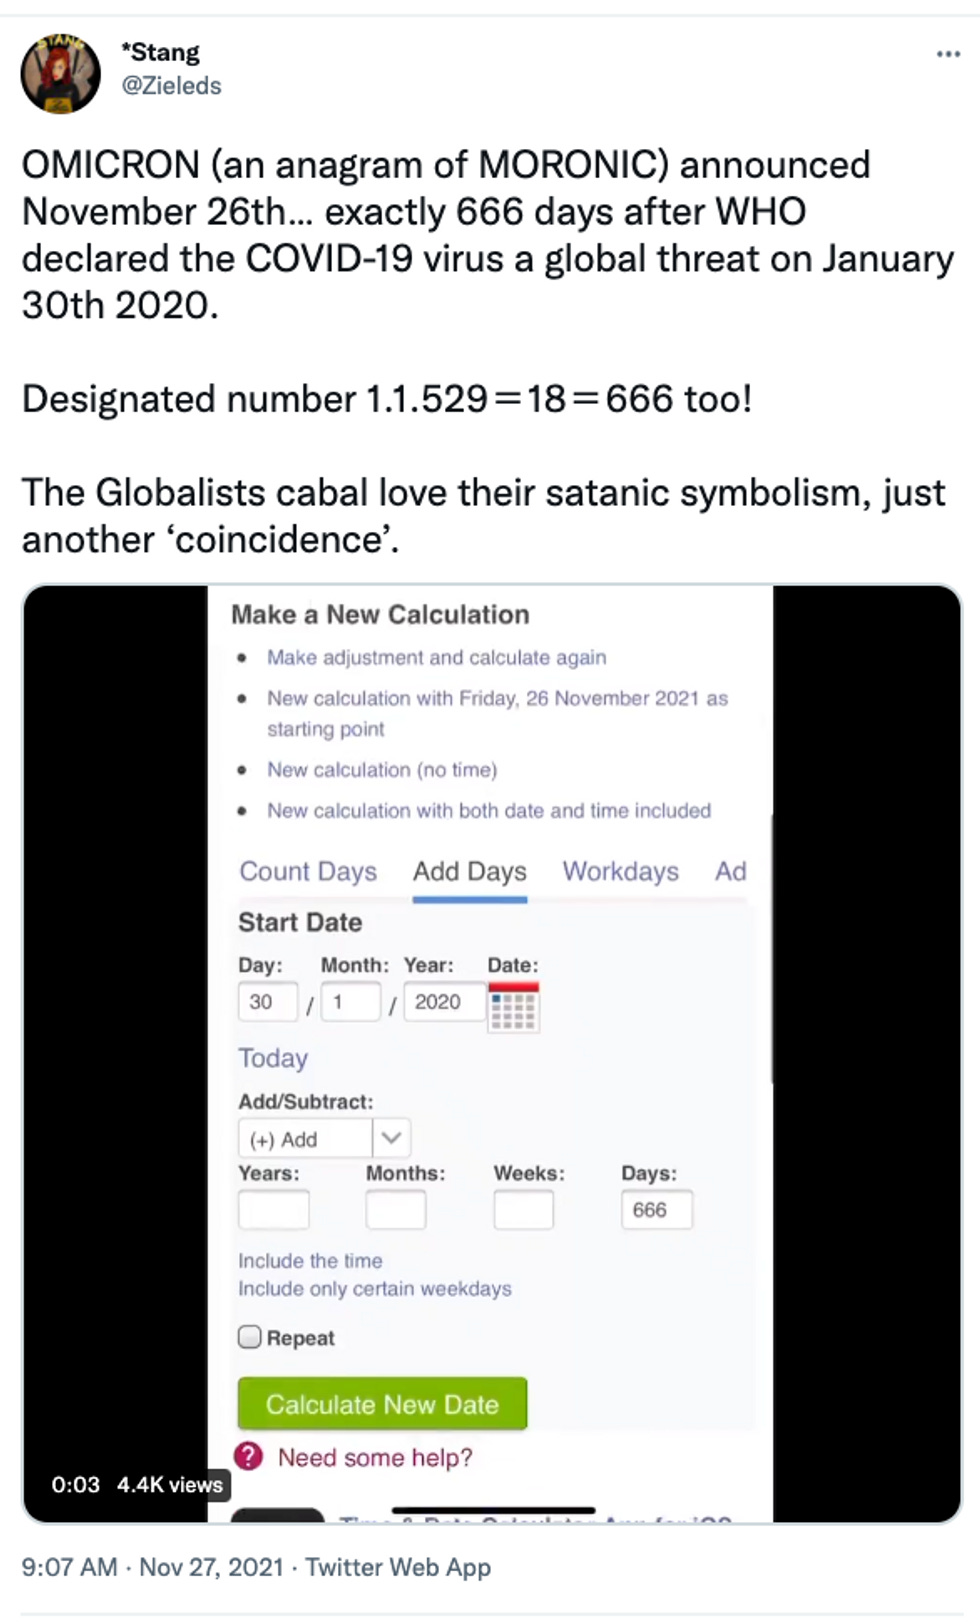 OMICRON (an anagram of MORONIC) announced November 26th\u2026 exactly 666 days after WHO declared the COVID-19 virus a global threat on January 30th 2020.  Designated number 1.1.529\uff1d18\uff1d666 too!  The Globalists cabal love their satanic symbolism, just another \u2018coincidence\u2019.